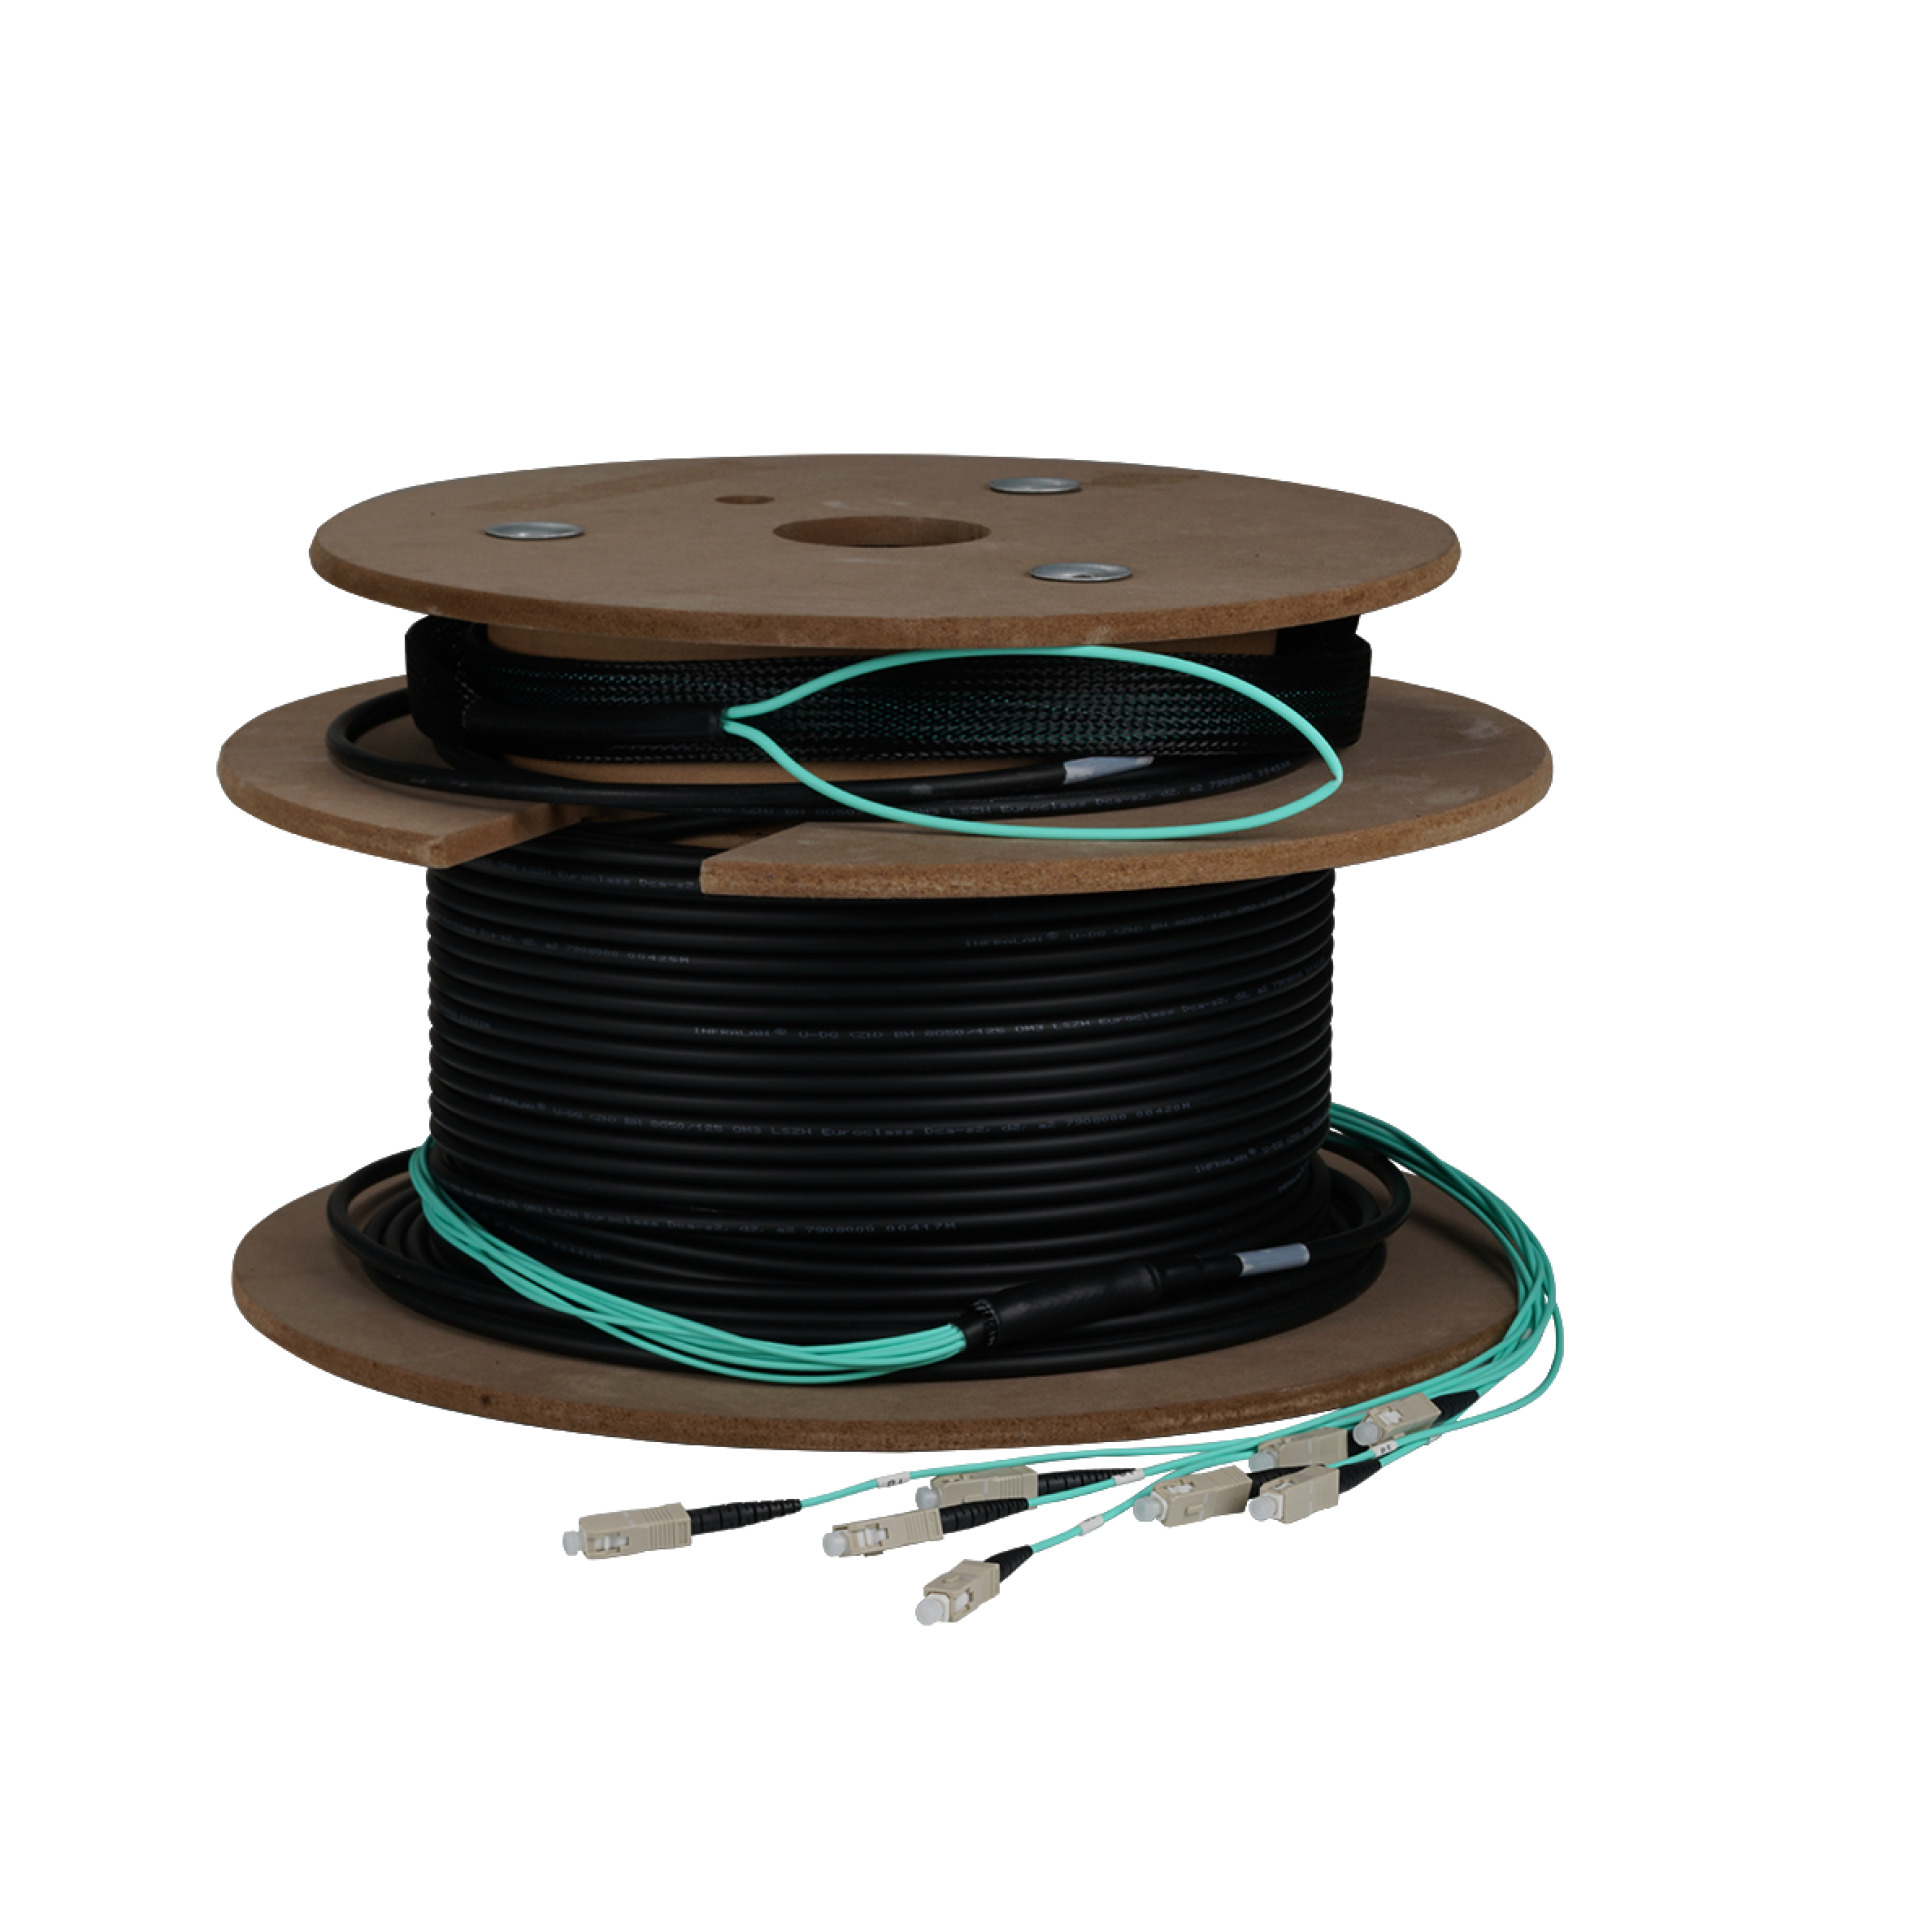 Trunkcable U-DQ(ZN)BH 8G 50/125, SC/SC OM3 200m